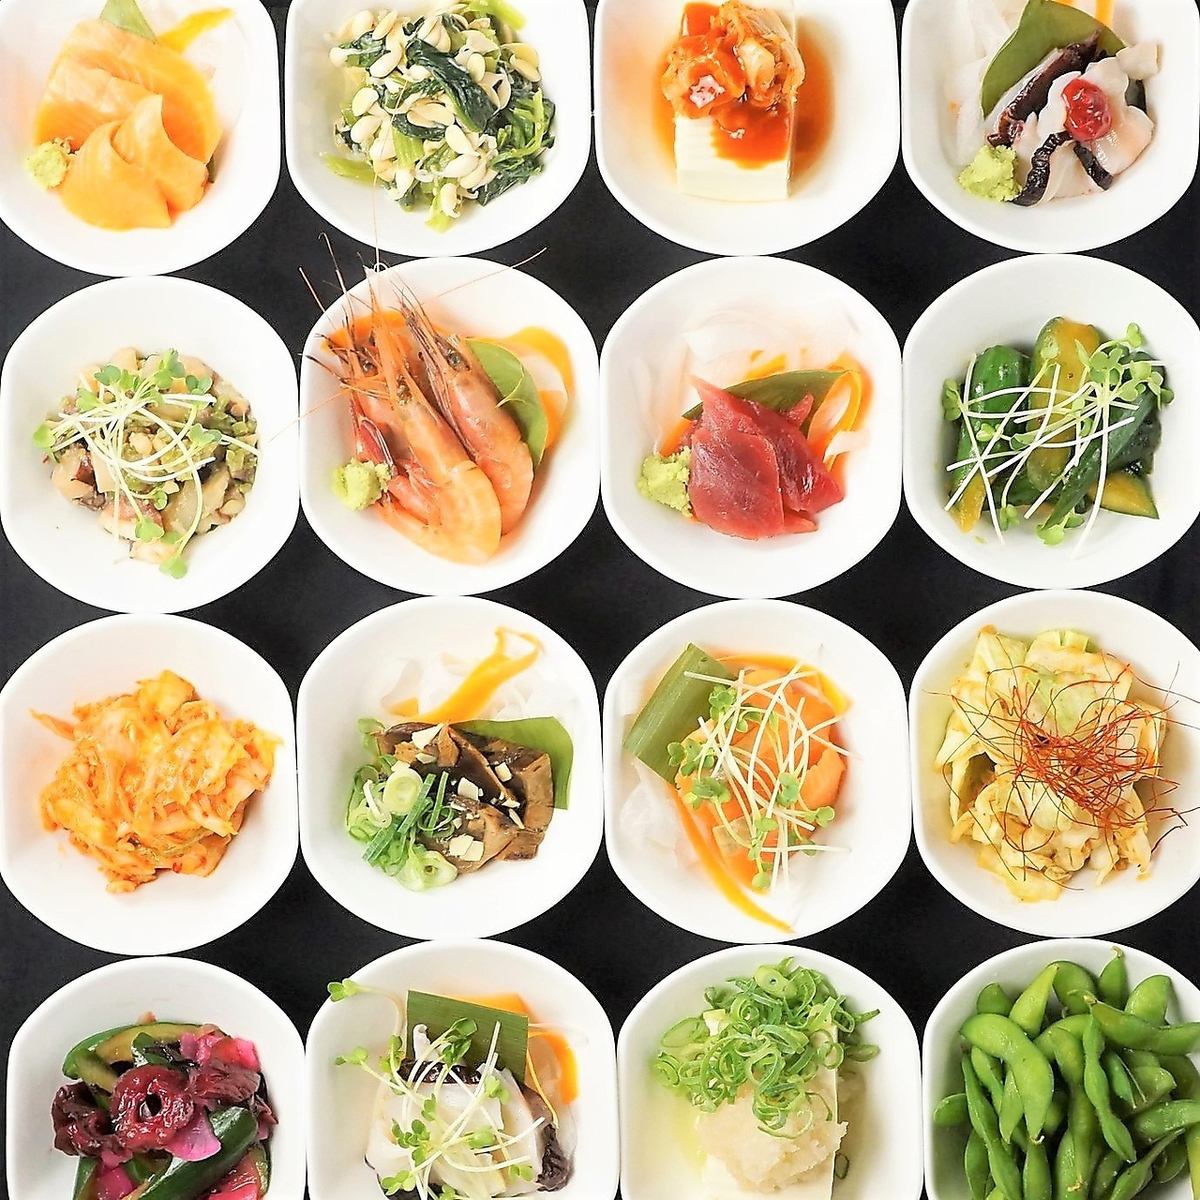 100 kinds of all-you-can-eat and drink for 3 hours [yakitori & jumbo gyoza included] ⇒ 2999 yen (tax included)